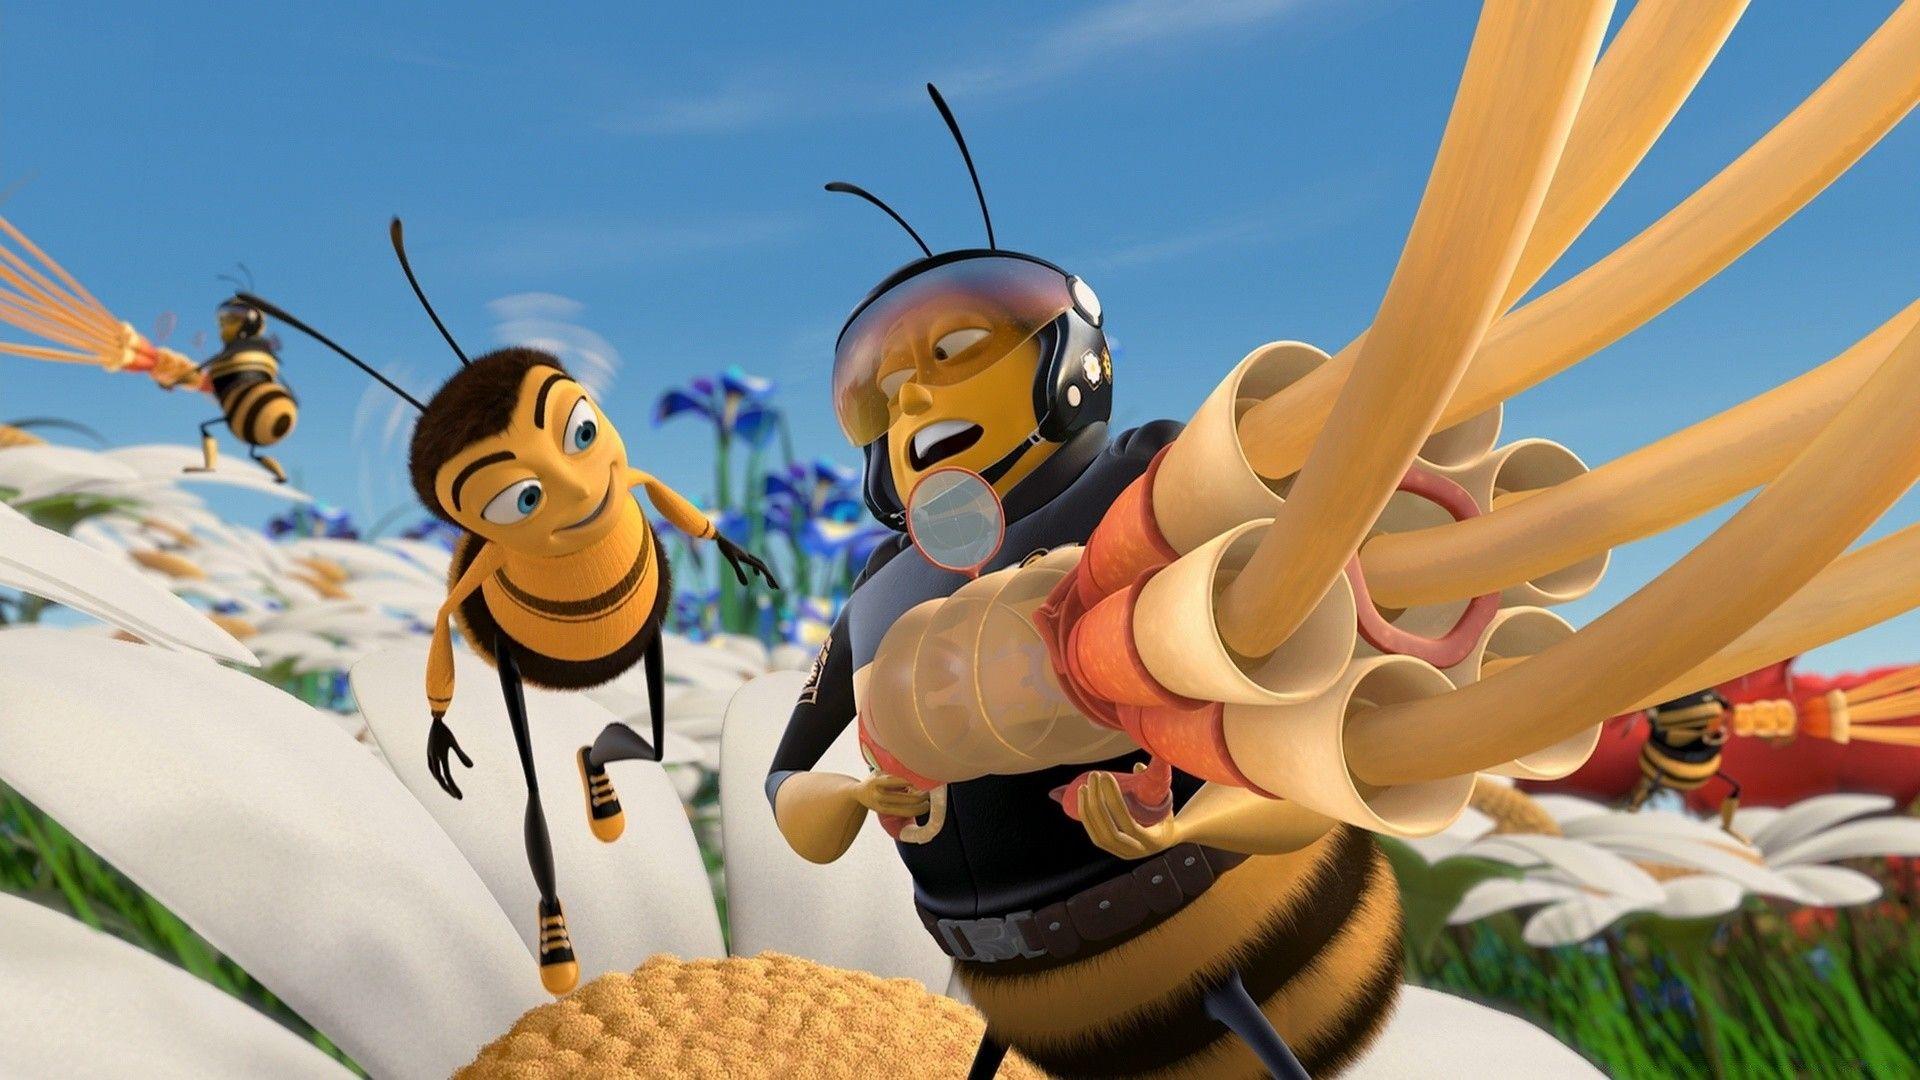 Bee Movie 4. Android wallpaper for free